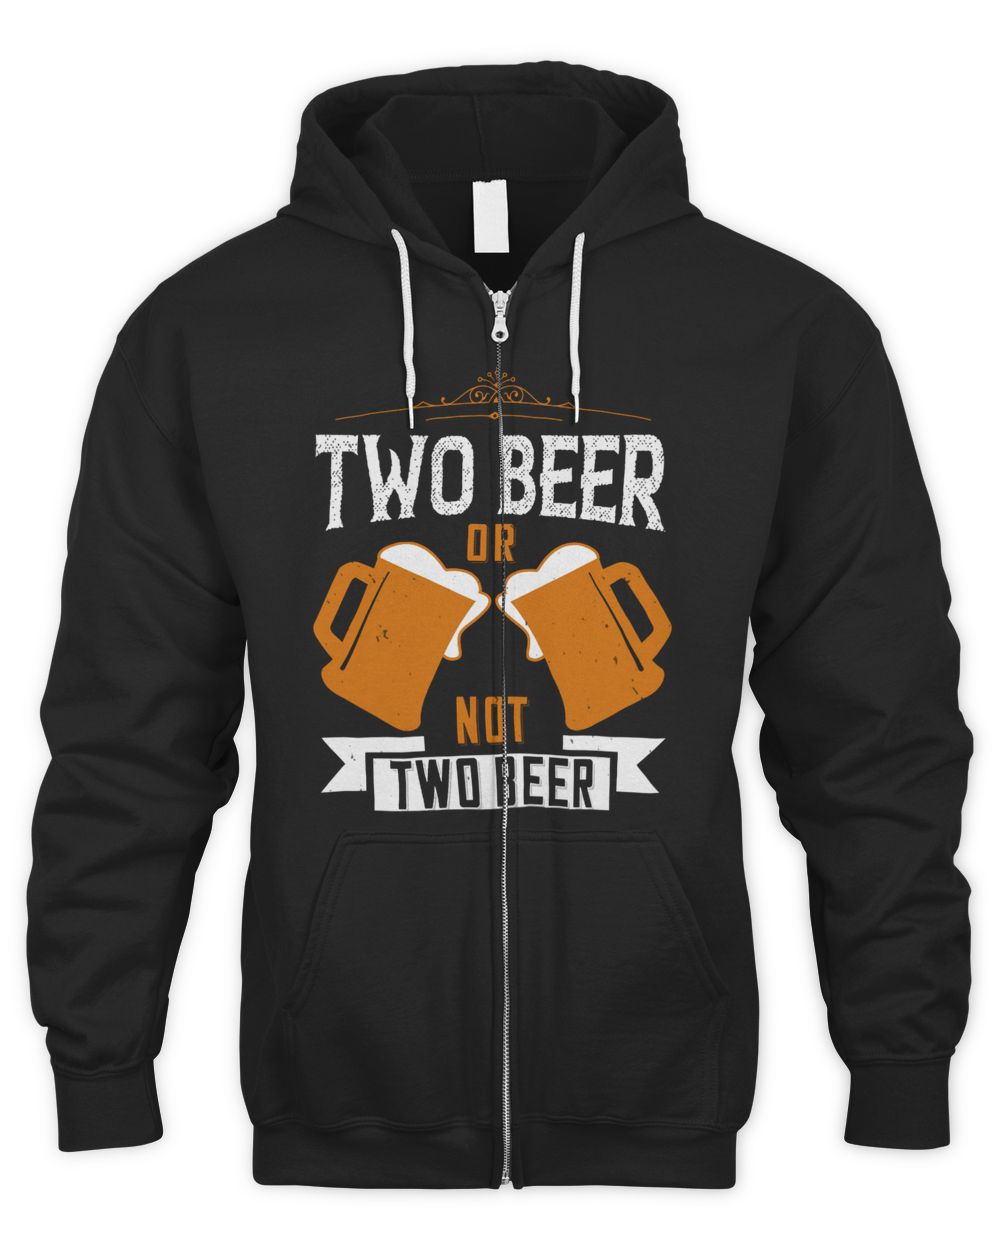 Two Beer Or Not Two Beer Beer Shirt For Beer Lover With Free Shipping, Great Gift For Fathers Day Men's Zip Hoodie black 